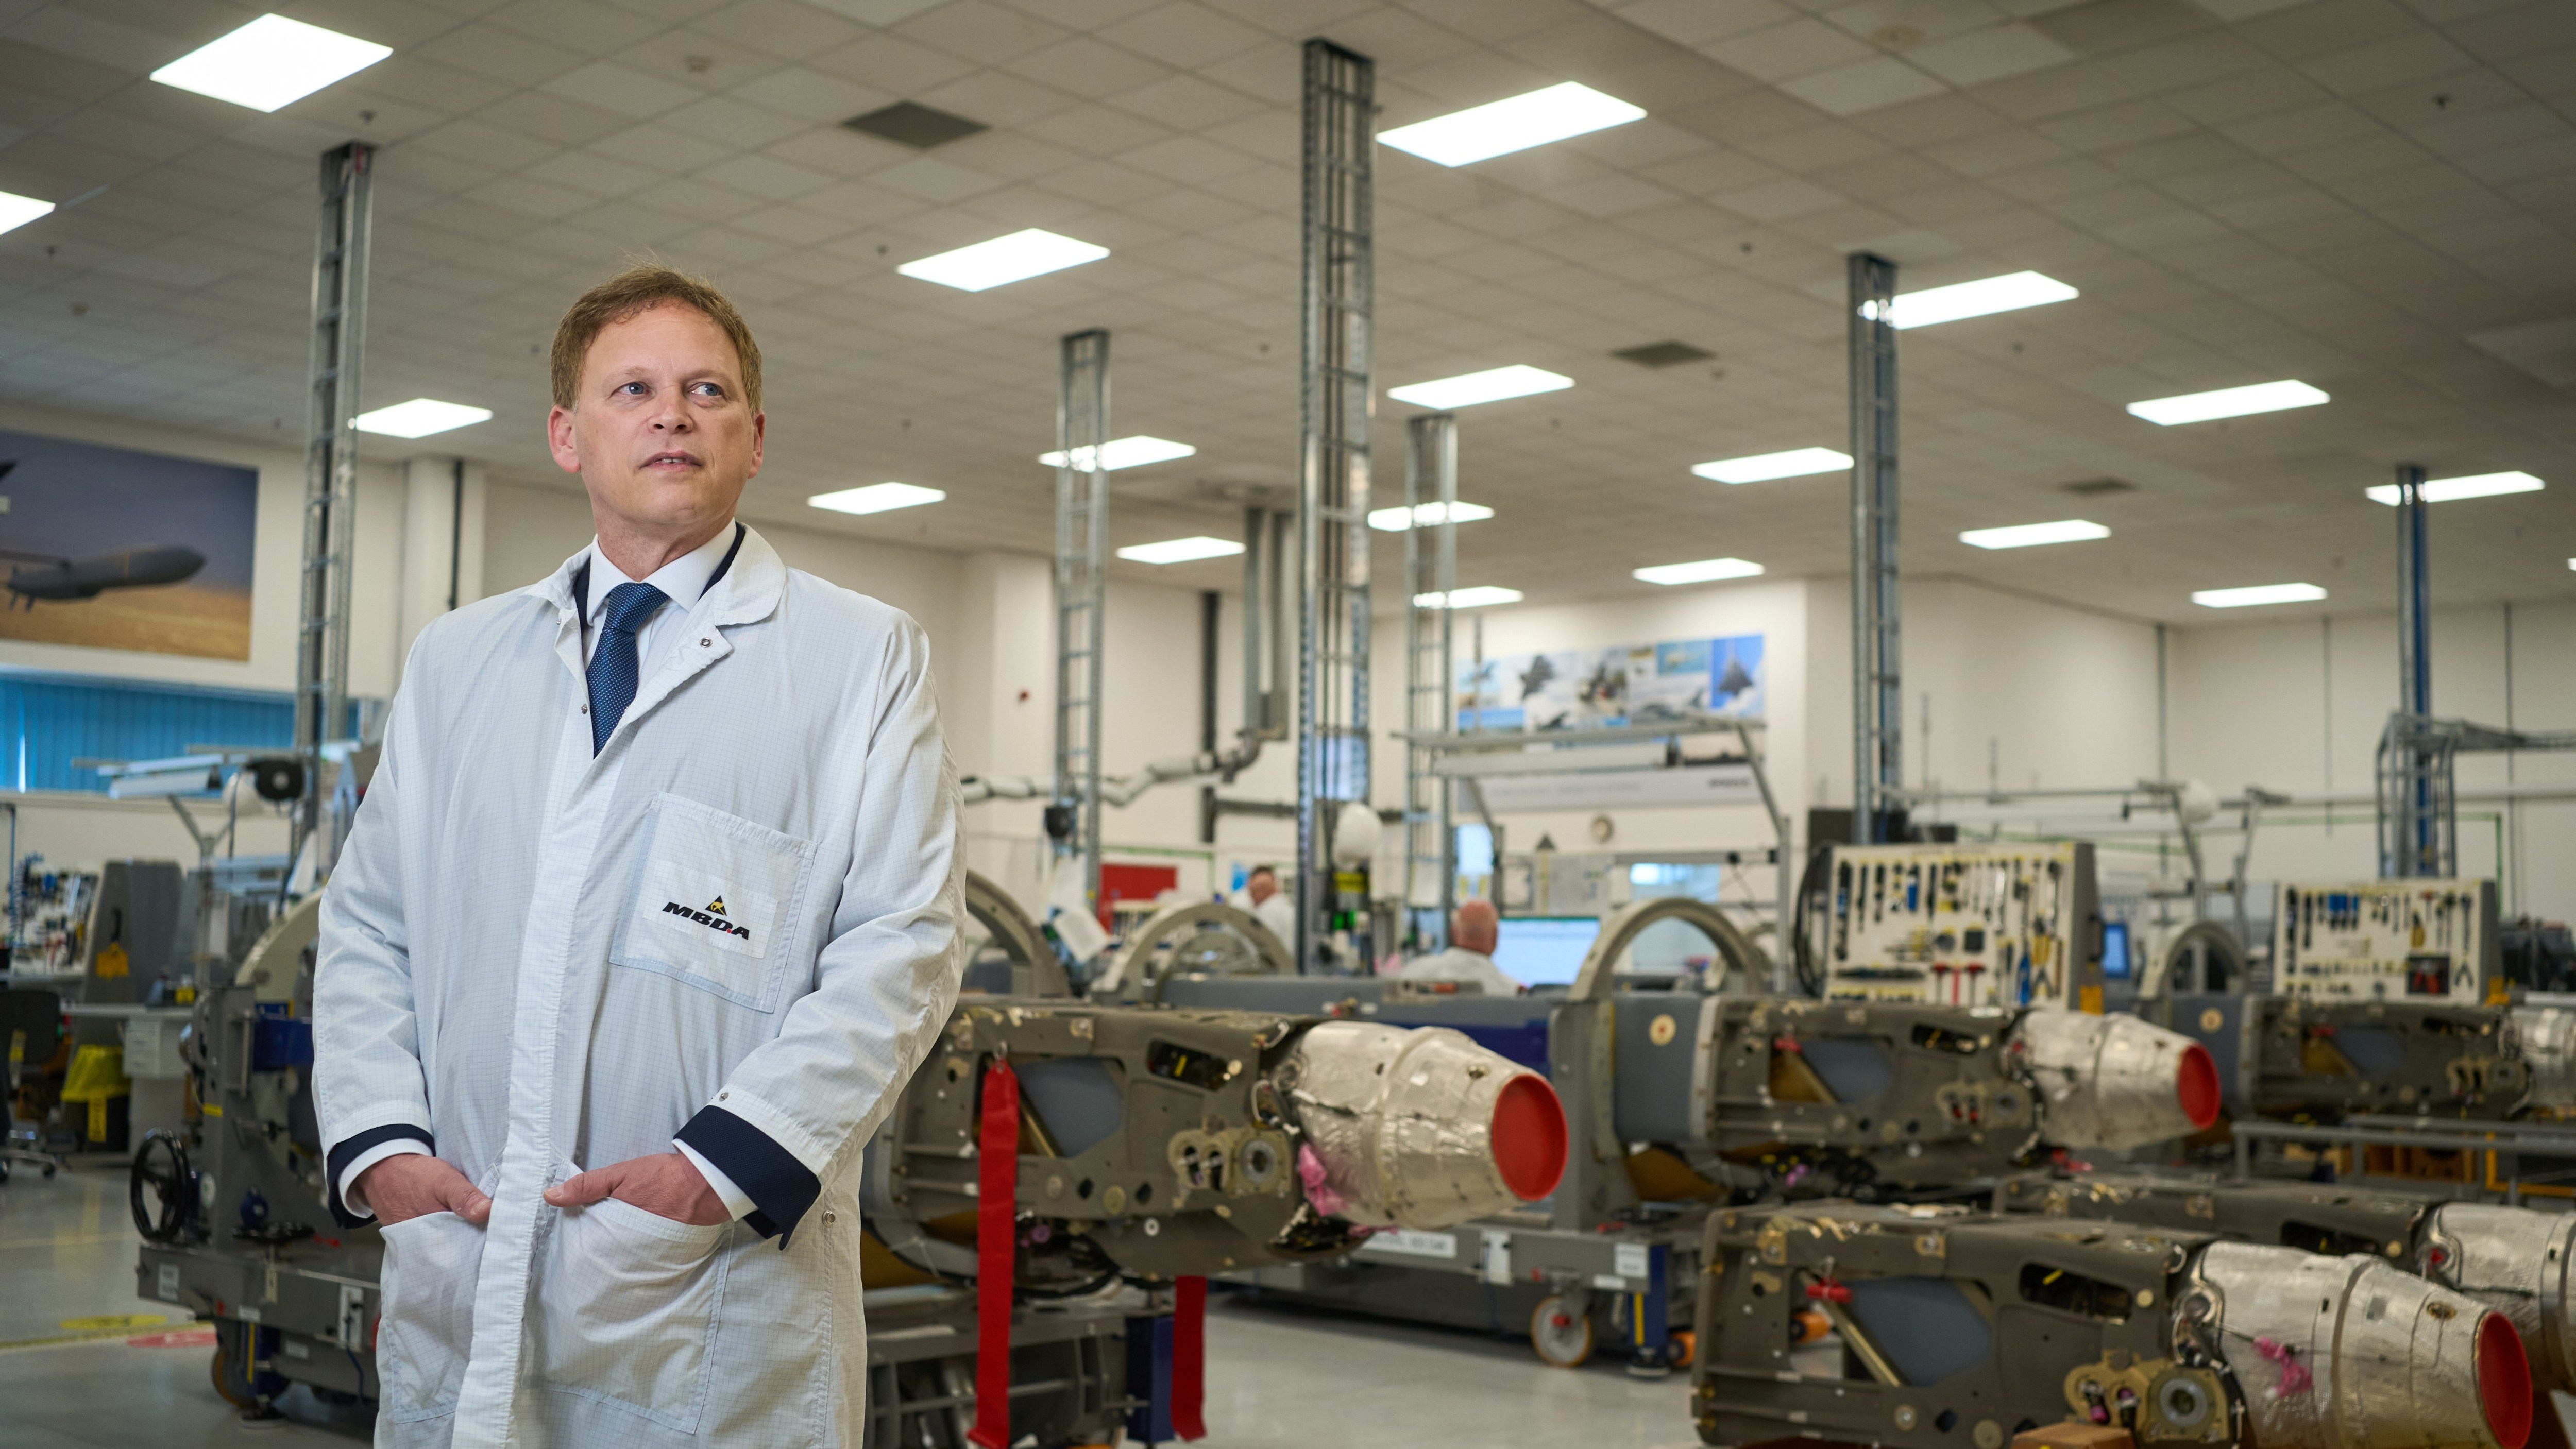 Grant Shapps visits the Storm Shadow missile assembly line at MBDA, in Stevenage